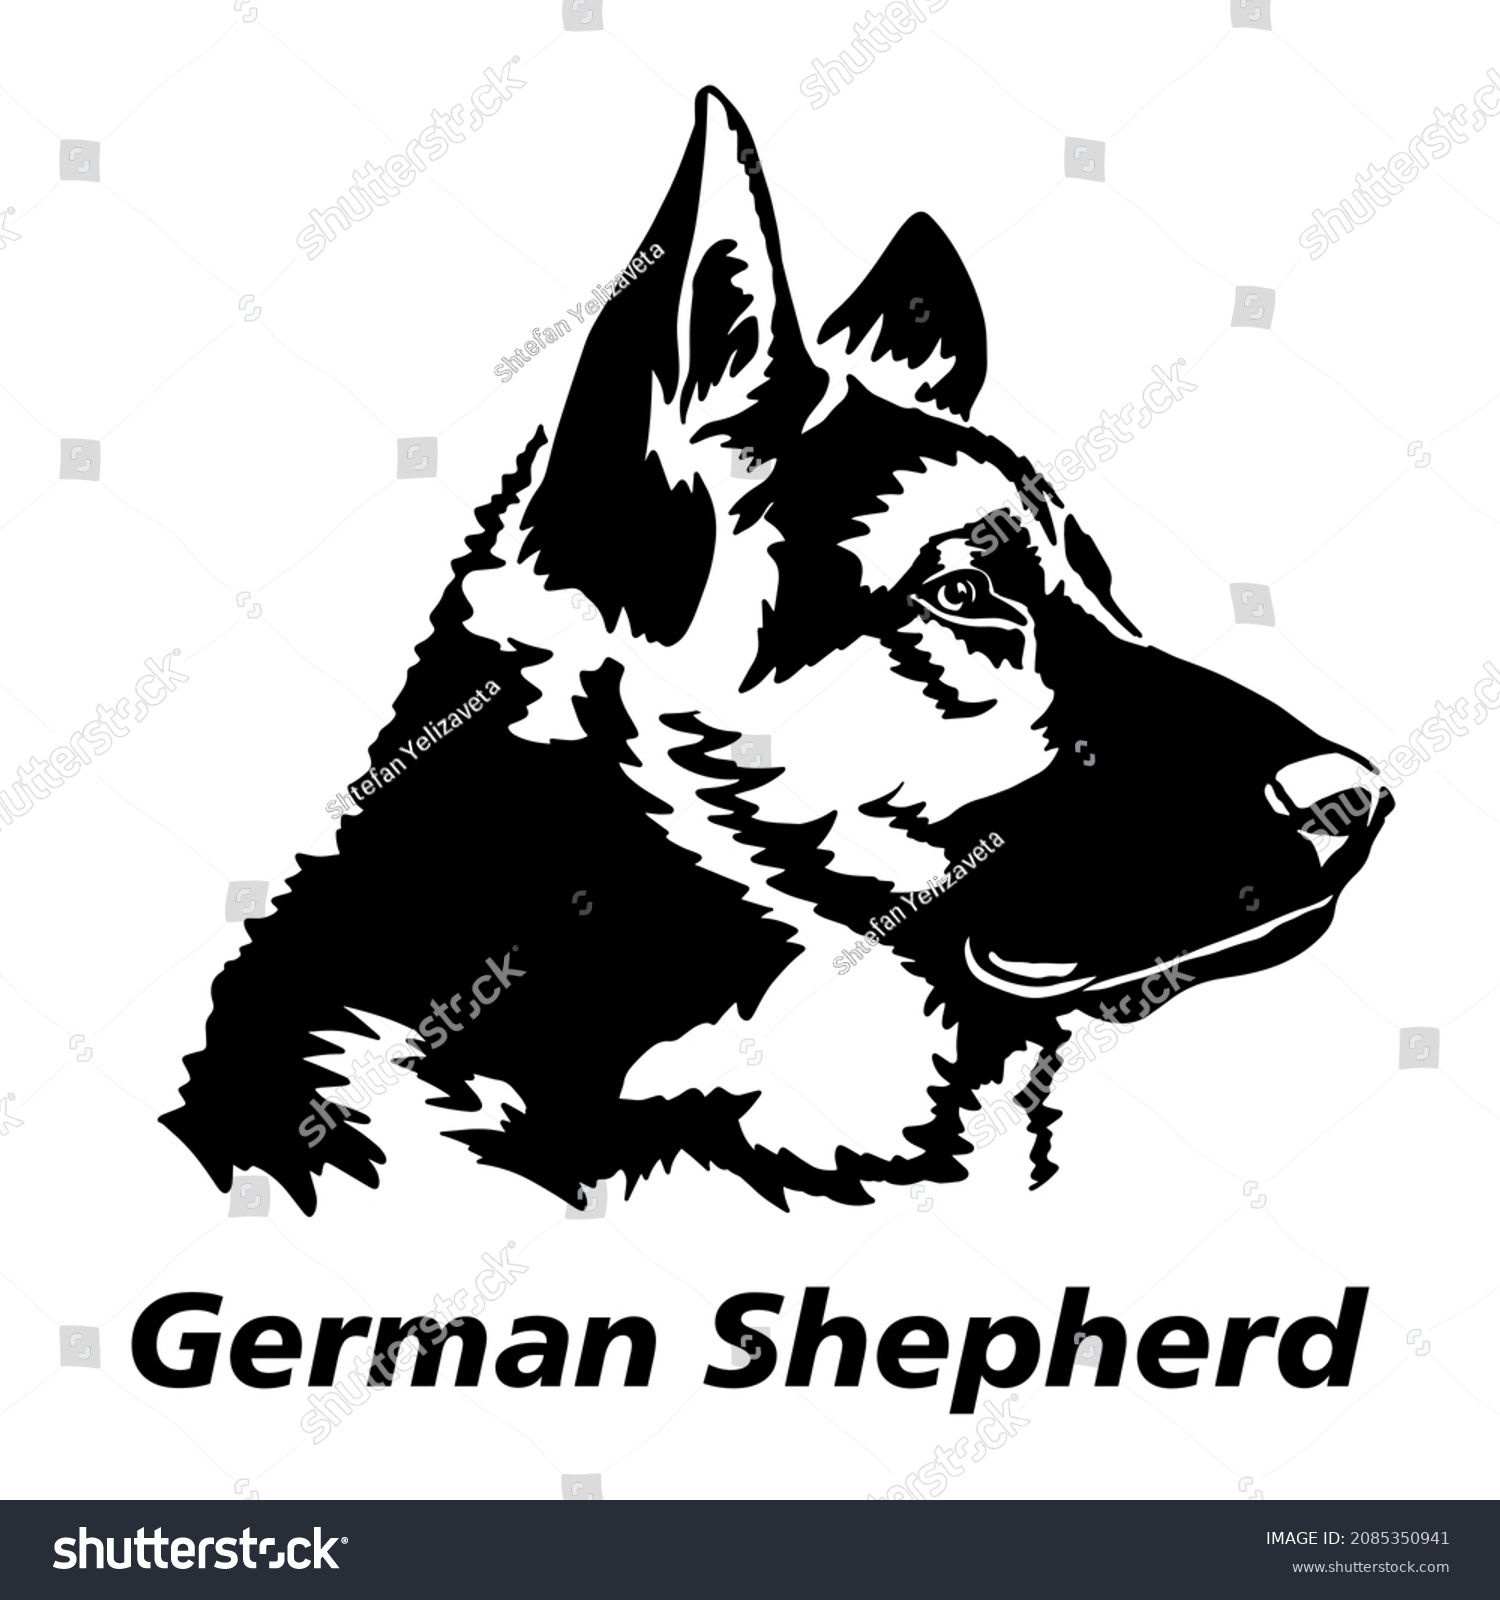 SVG of German Shepherd Dog - Profile - Breed Face Head Isolated On White Background, For Cutting And Printing. Shepherd dog vector illustration svg